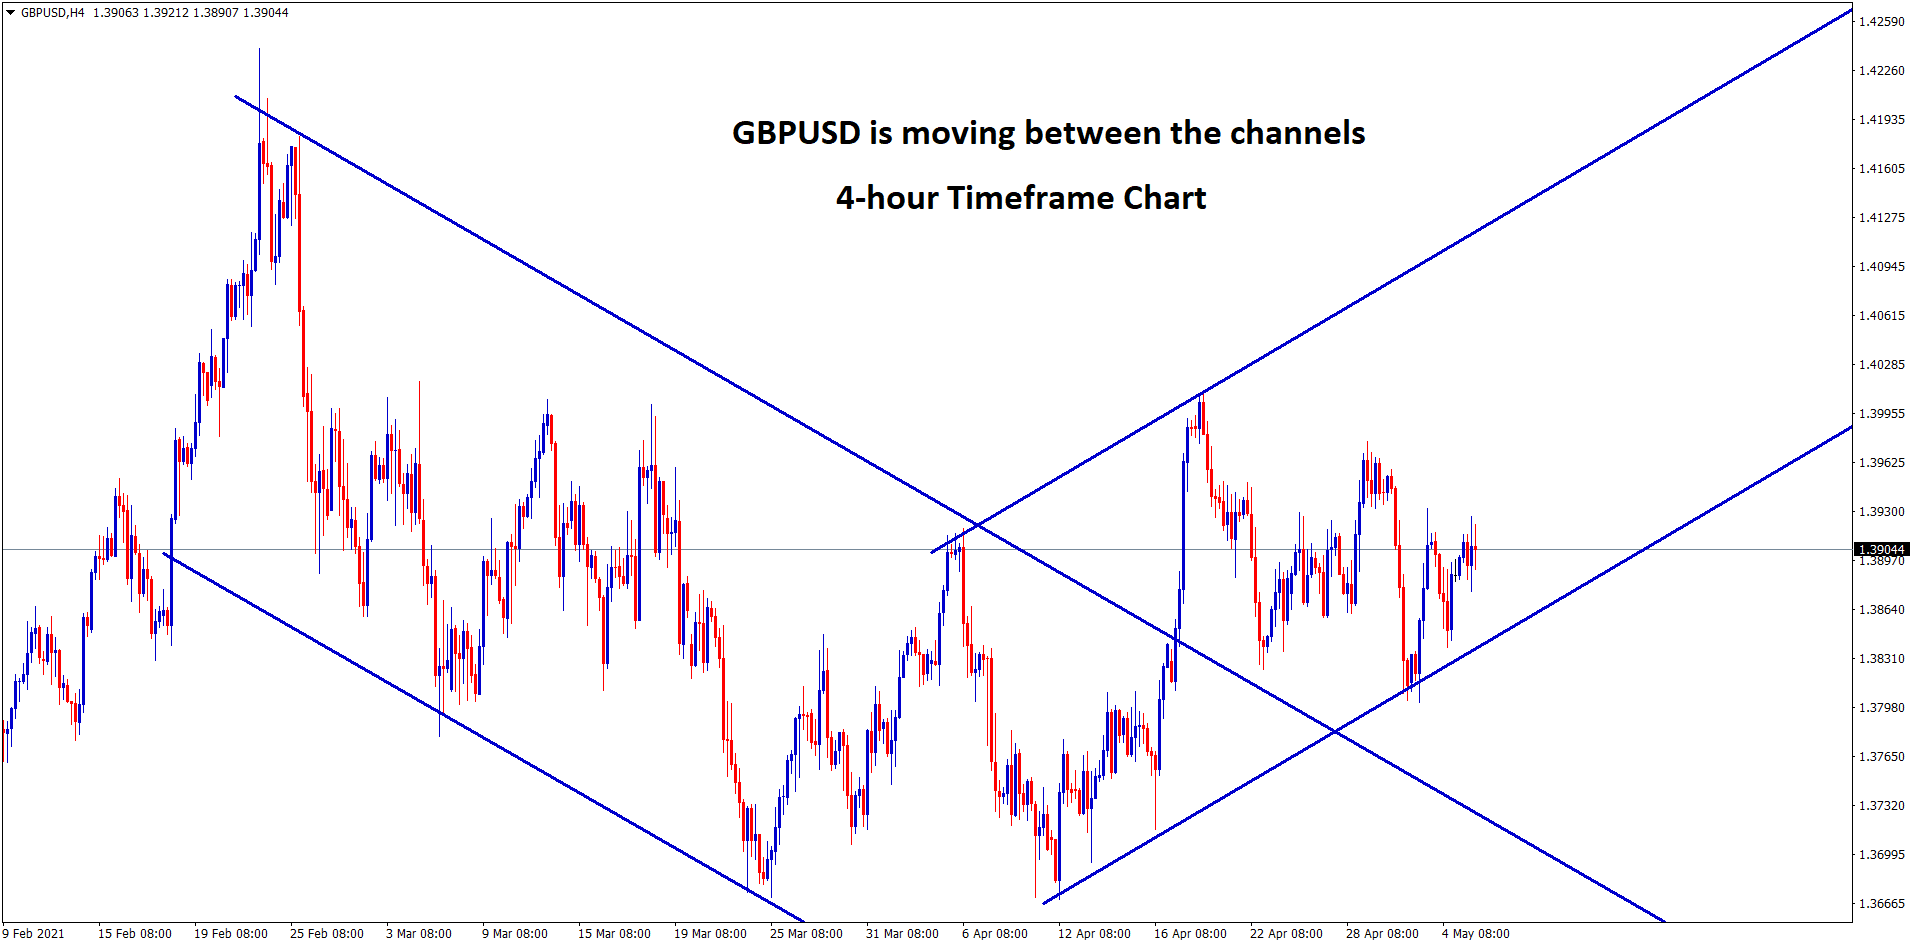 GBPUSD moving in a channel ranges